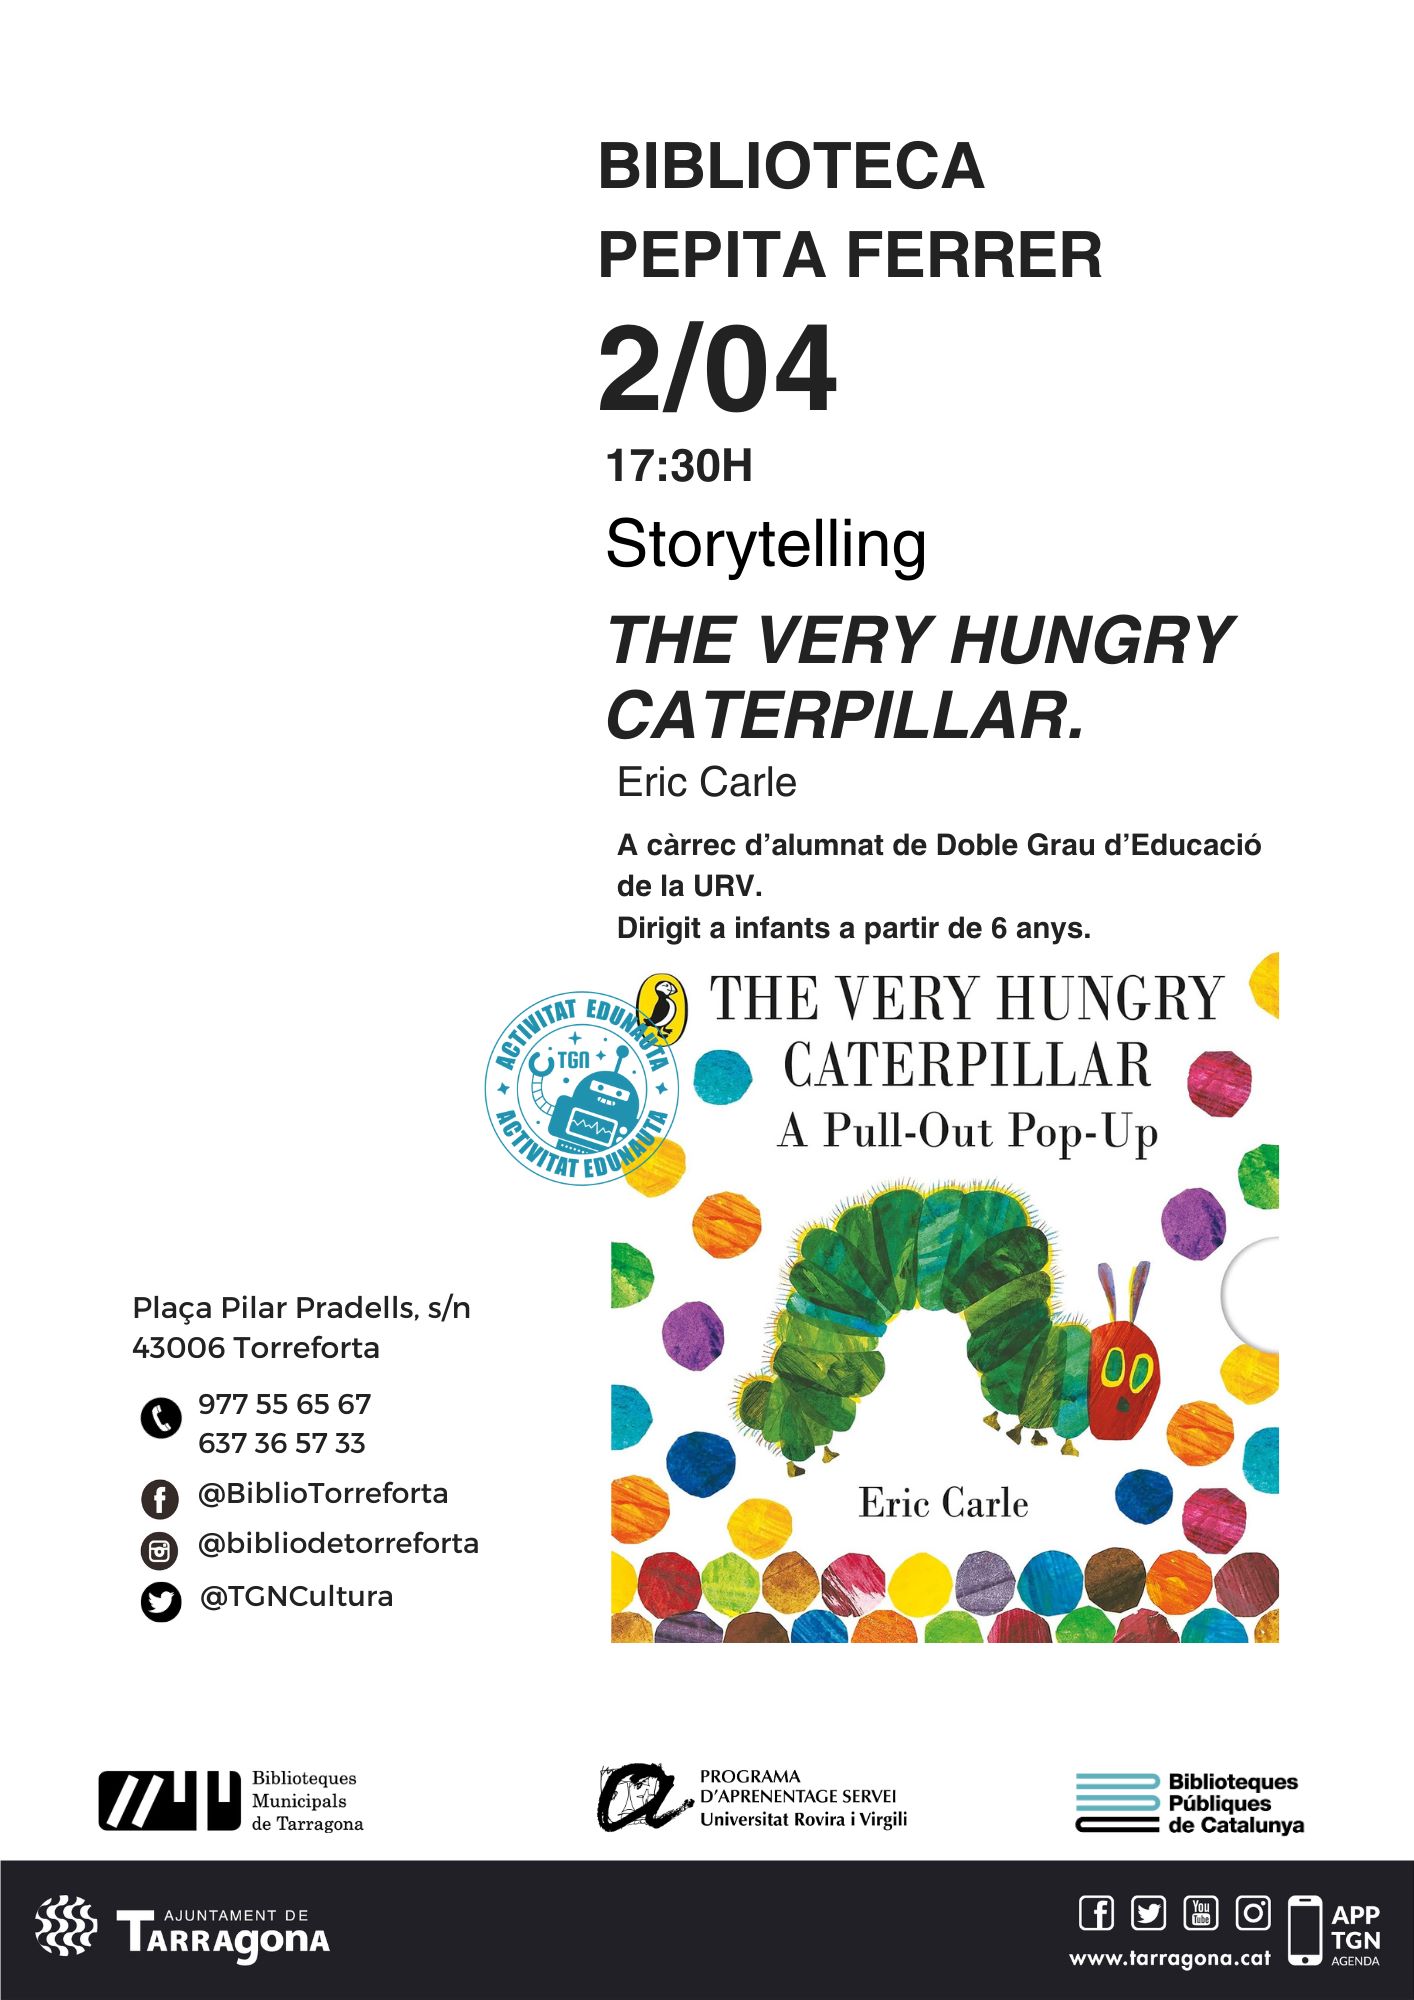 Storytelling: 'The Very Hungry Caterpillar' d'Eric Carle